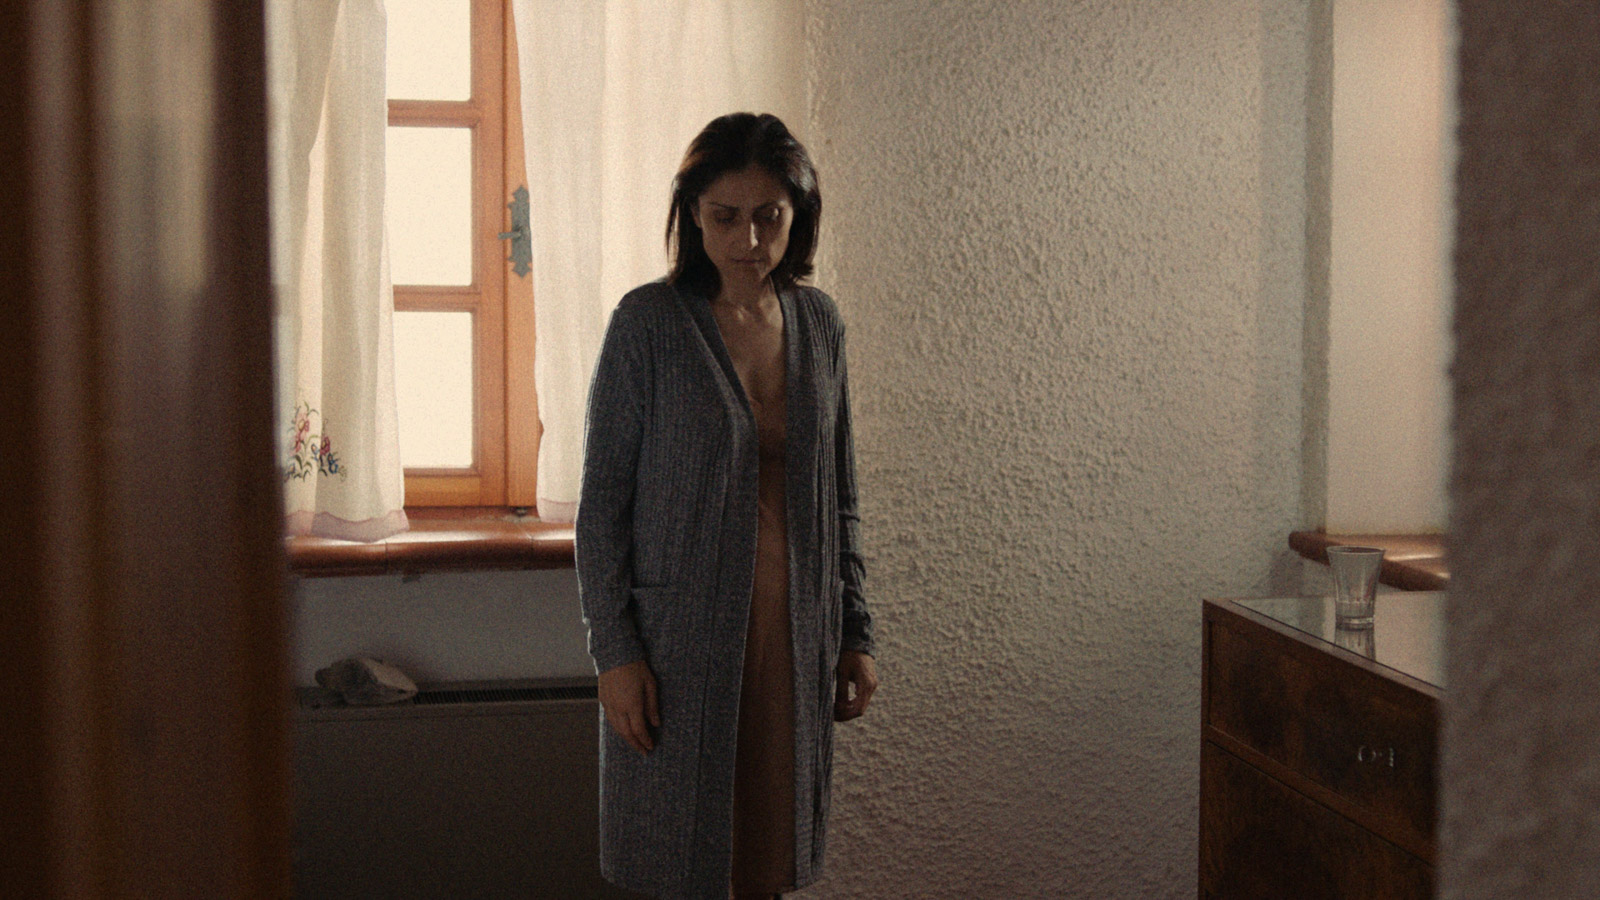 Gli ultimi a vederli vivere, The Last to See Them), Feature 80′, Cinematographer: Katharina Schelling, Director: Sara Summa, Production: German Film and Television Academy, 1:1,85 2K Arri Amira + Zeiss Ultra Prime Lenses, Berlinale Sektion Forum 2019, www.katharinaschelling.com